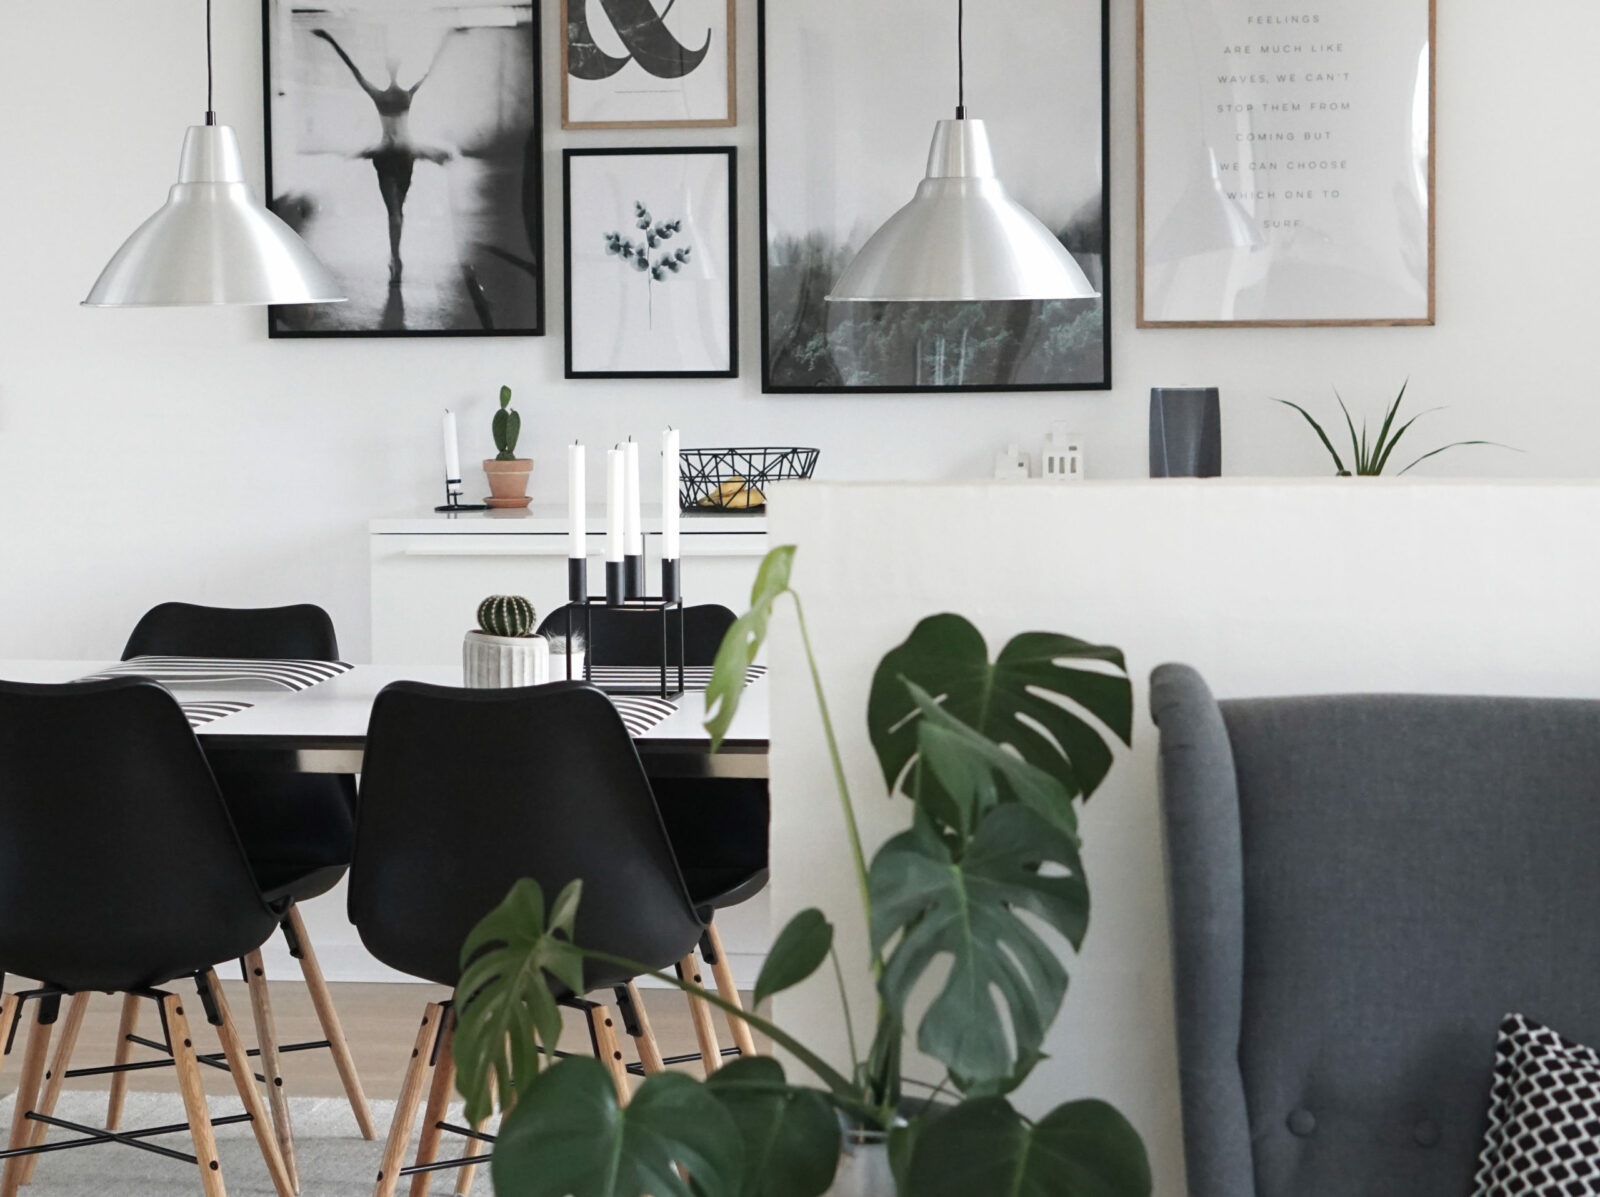 How to decorate your home the scandinavian way.